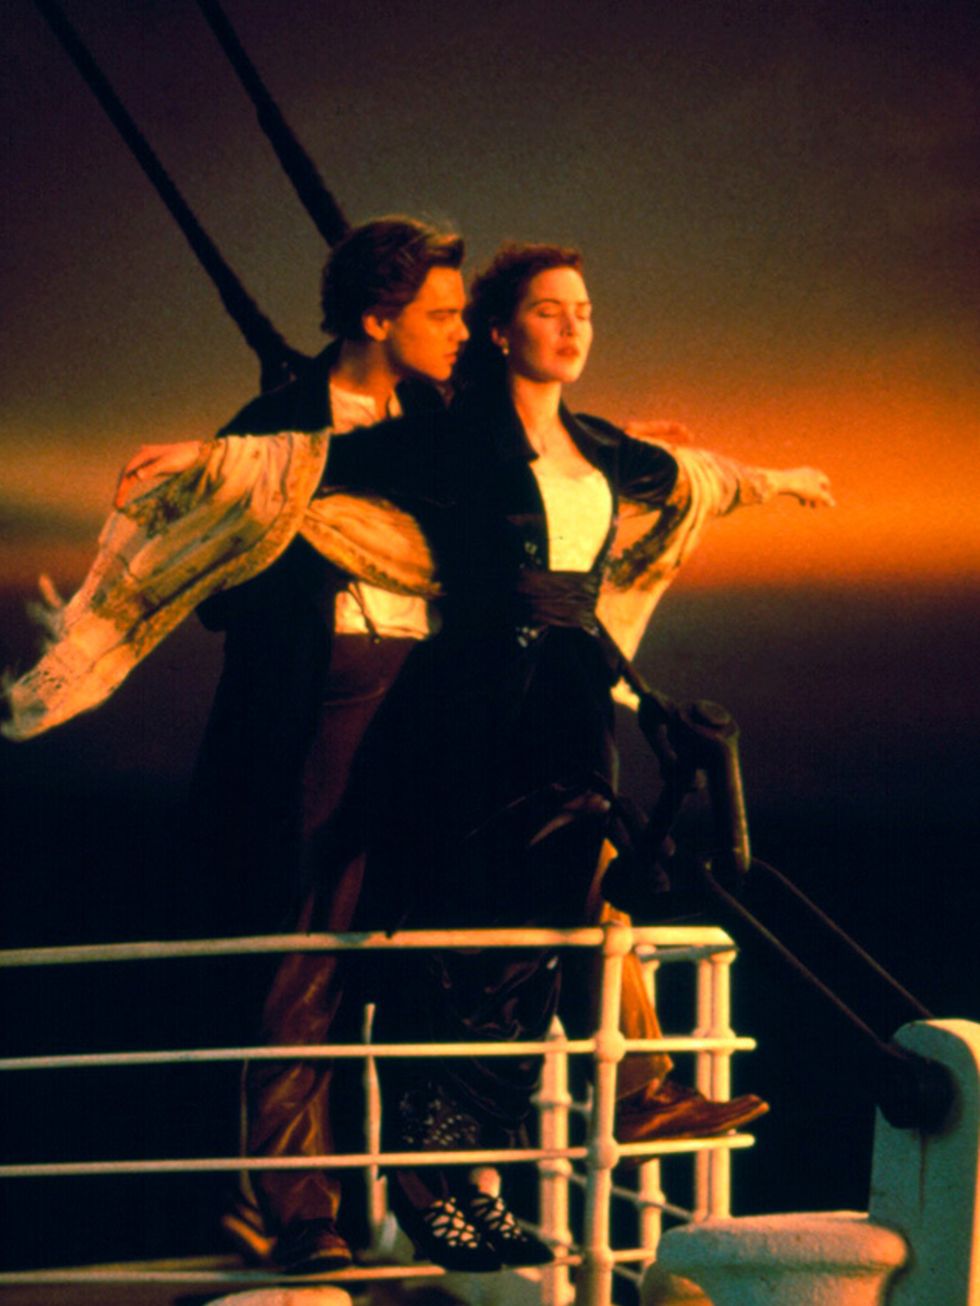 <p>Titanic, 1997</p>

<p>'Every night in my dreams, I see you, I feel you.'</p>